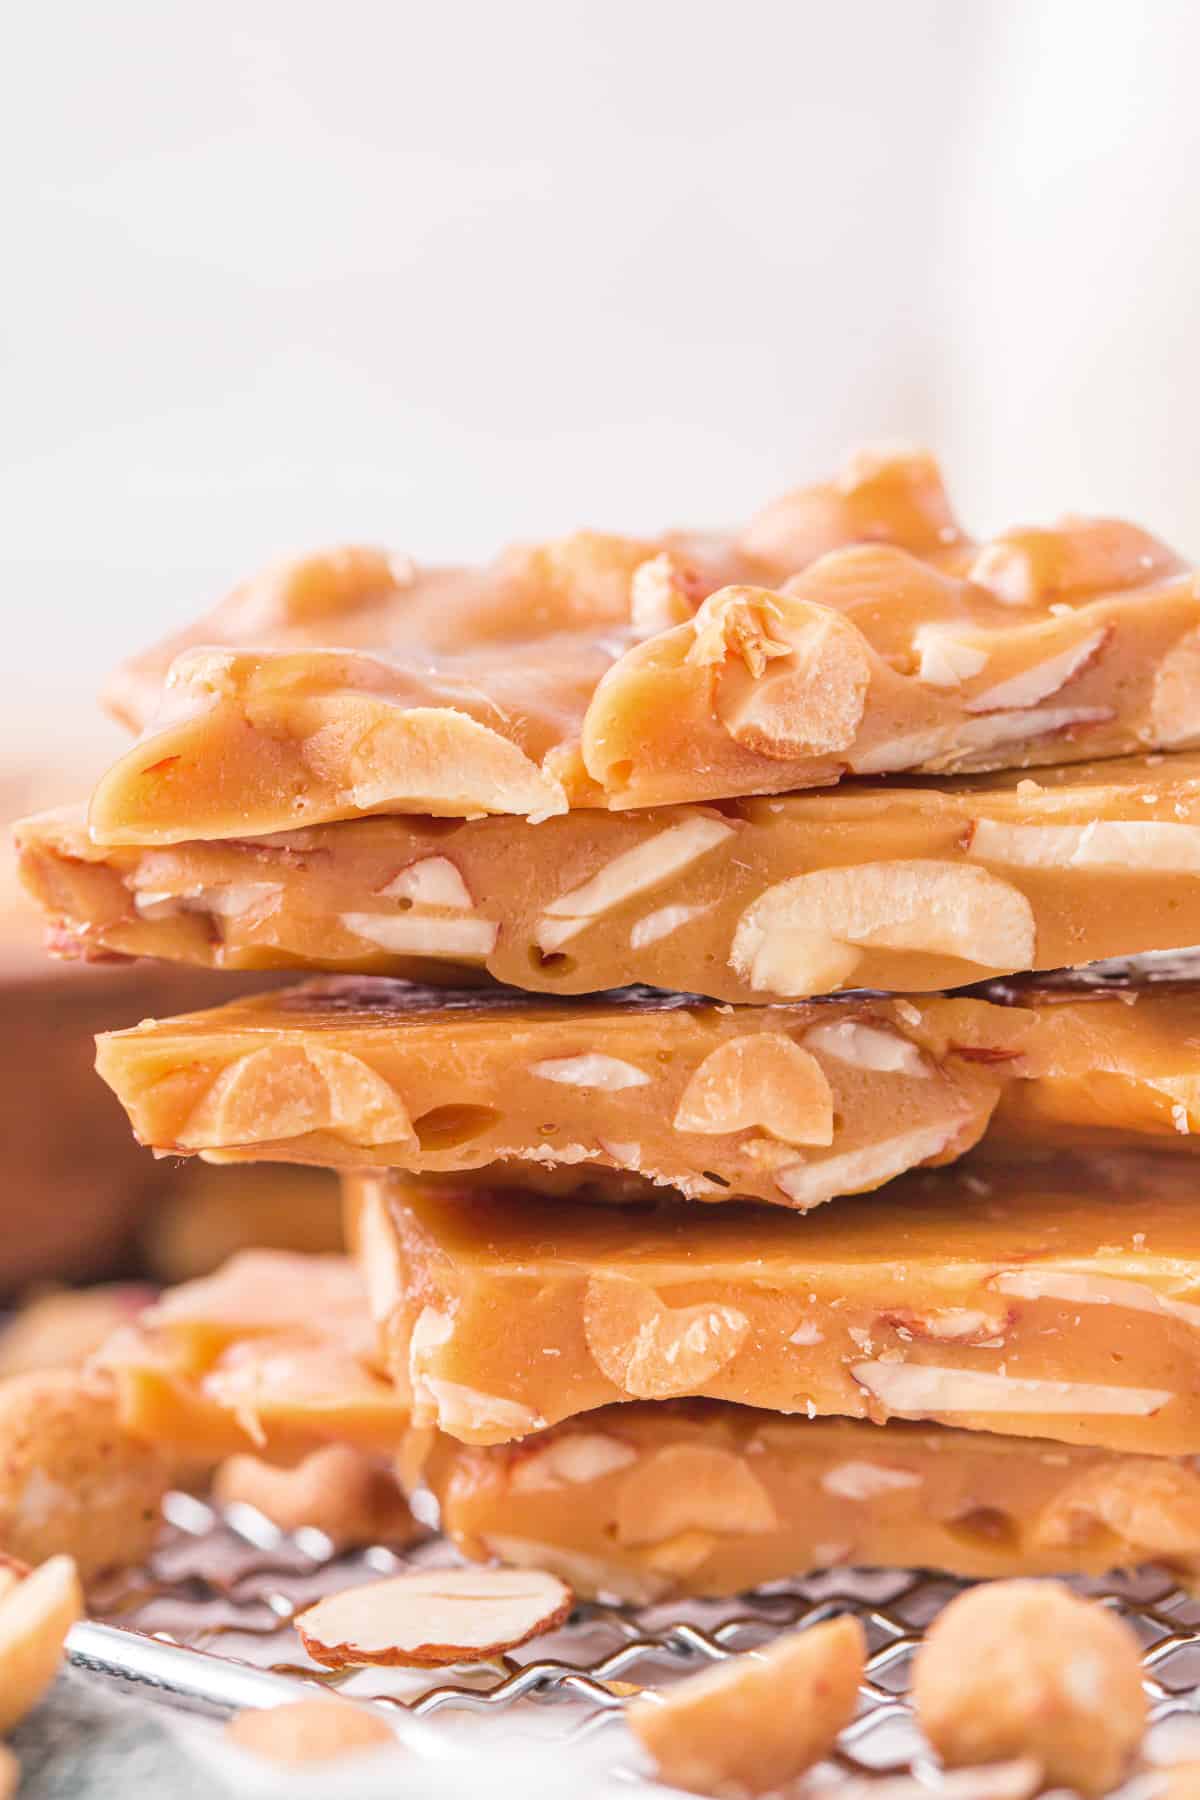 Side view of stack of homemade nut brittle with chunks of almonds and peanuts inside.